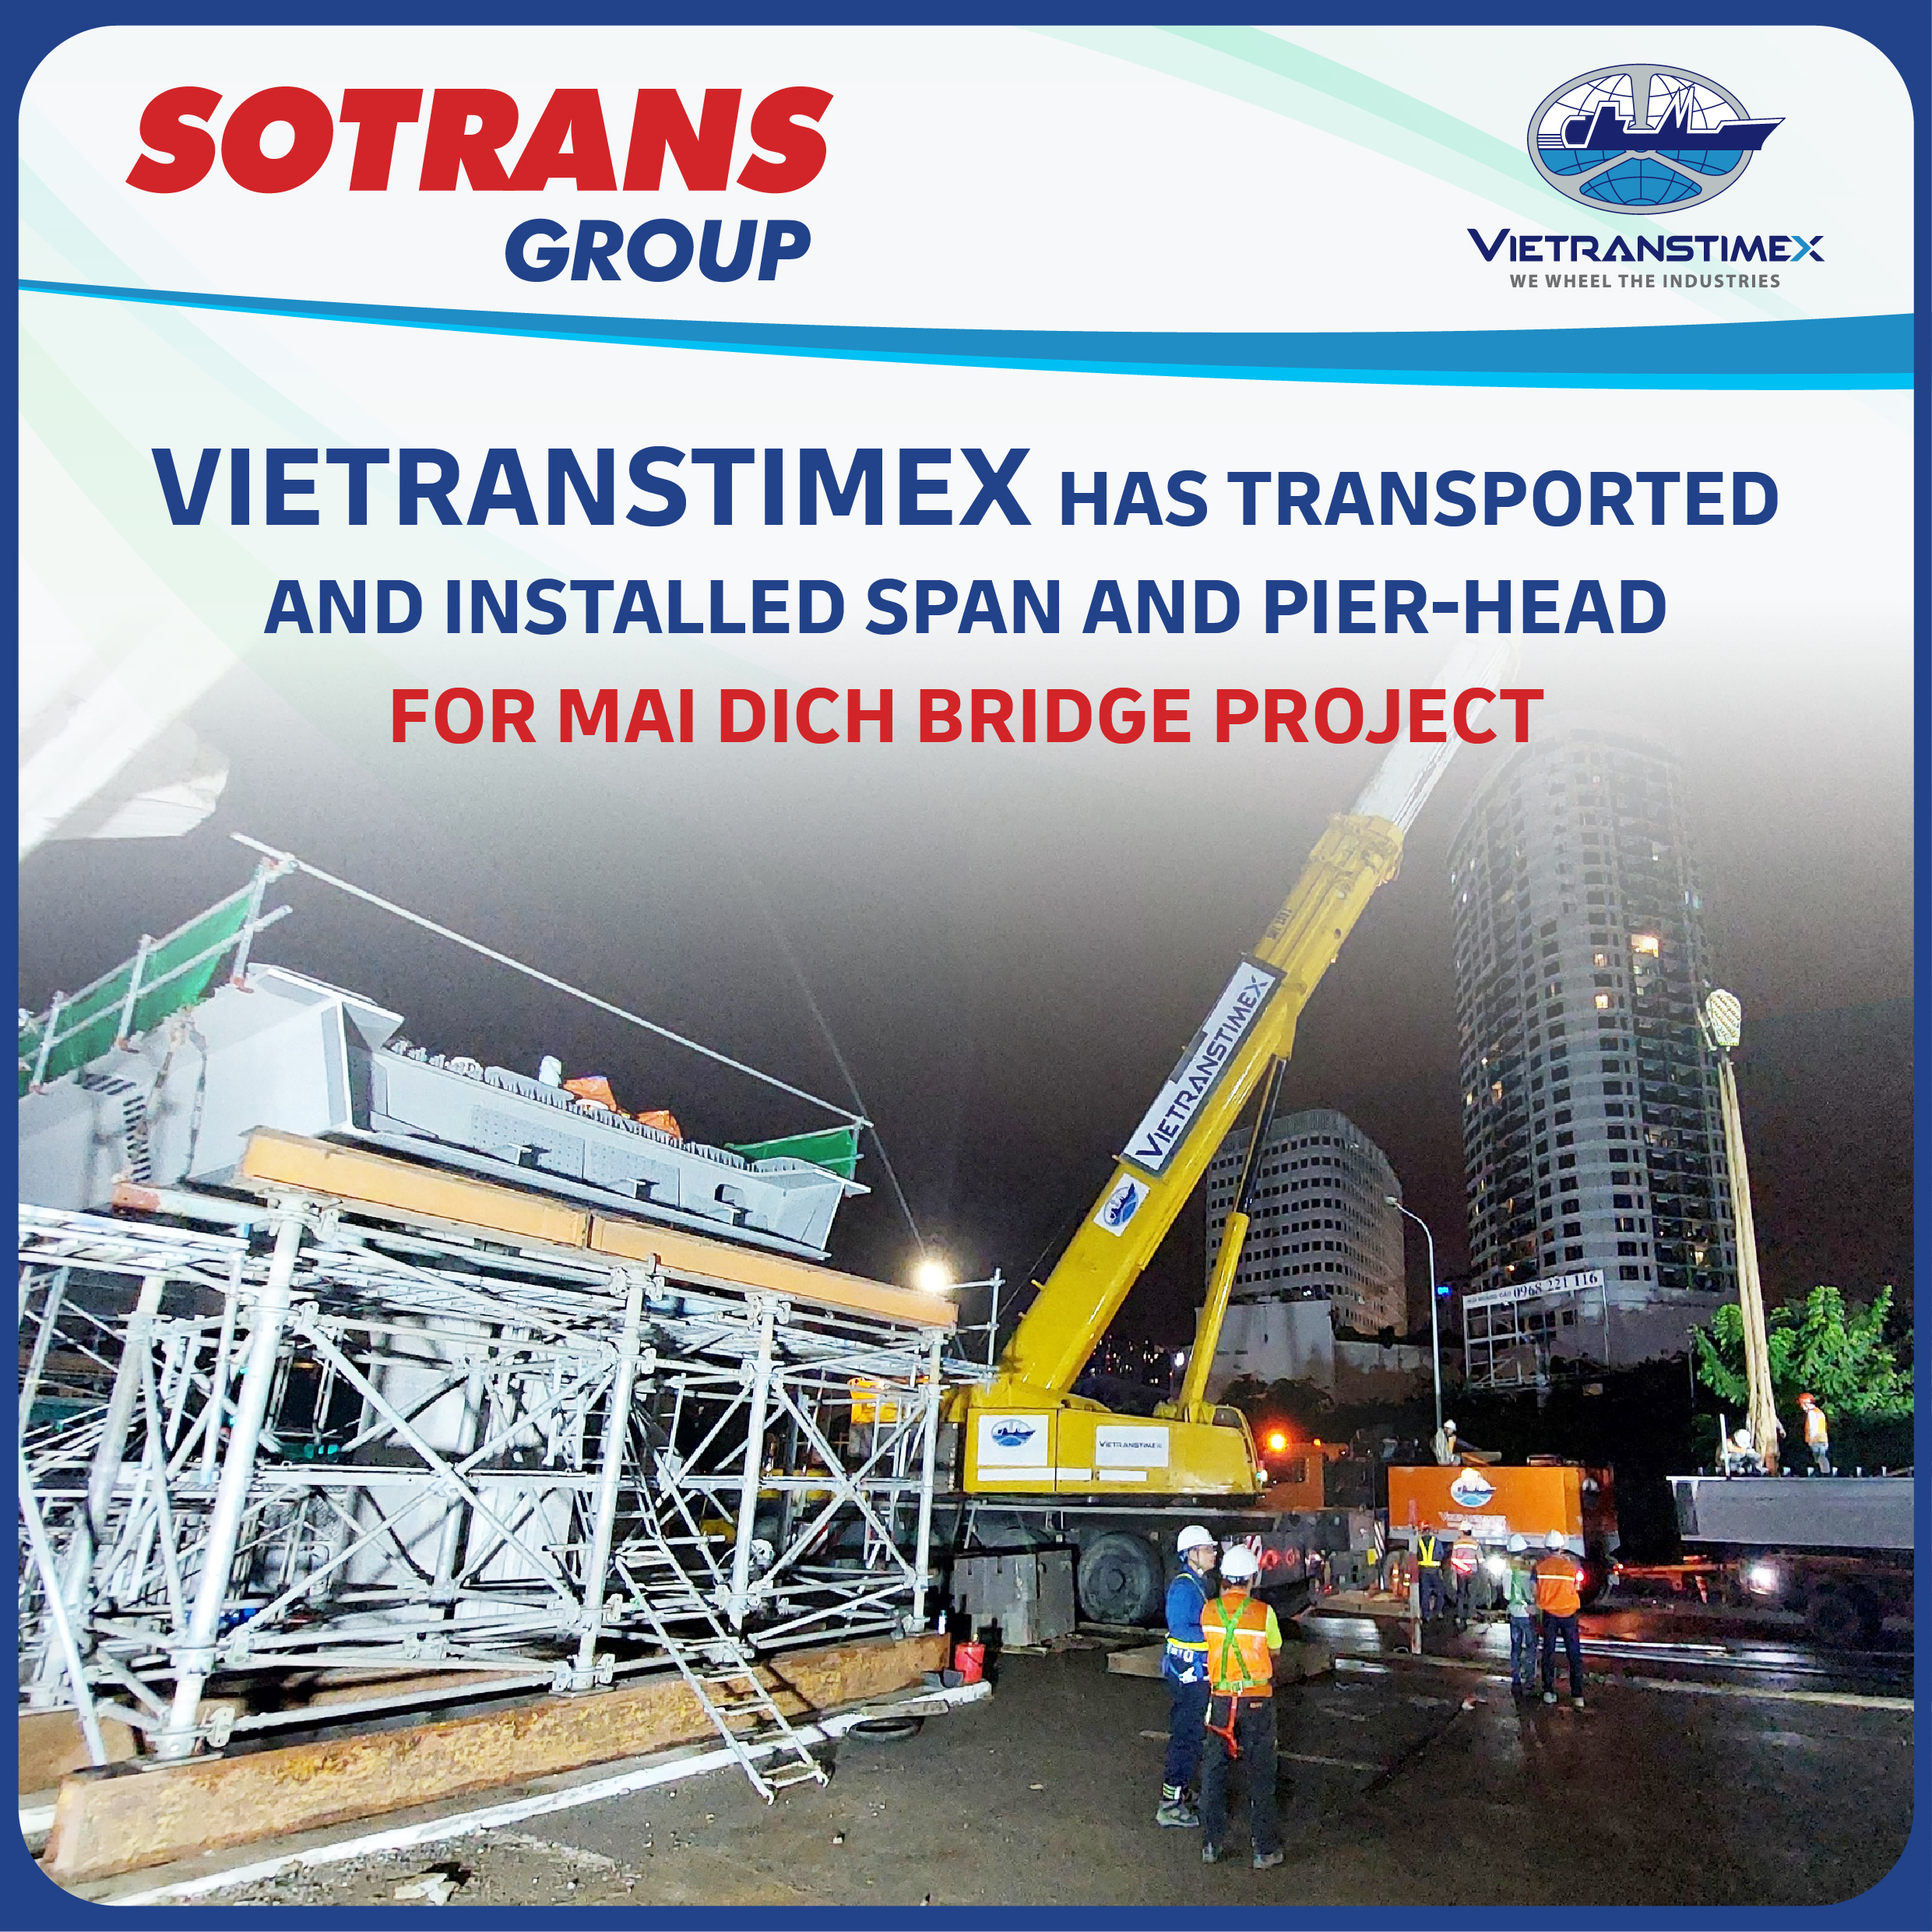 Vietranstimex Has Transported And Installed Span And Pier-Head For Mai Dich Bridge Project